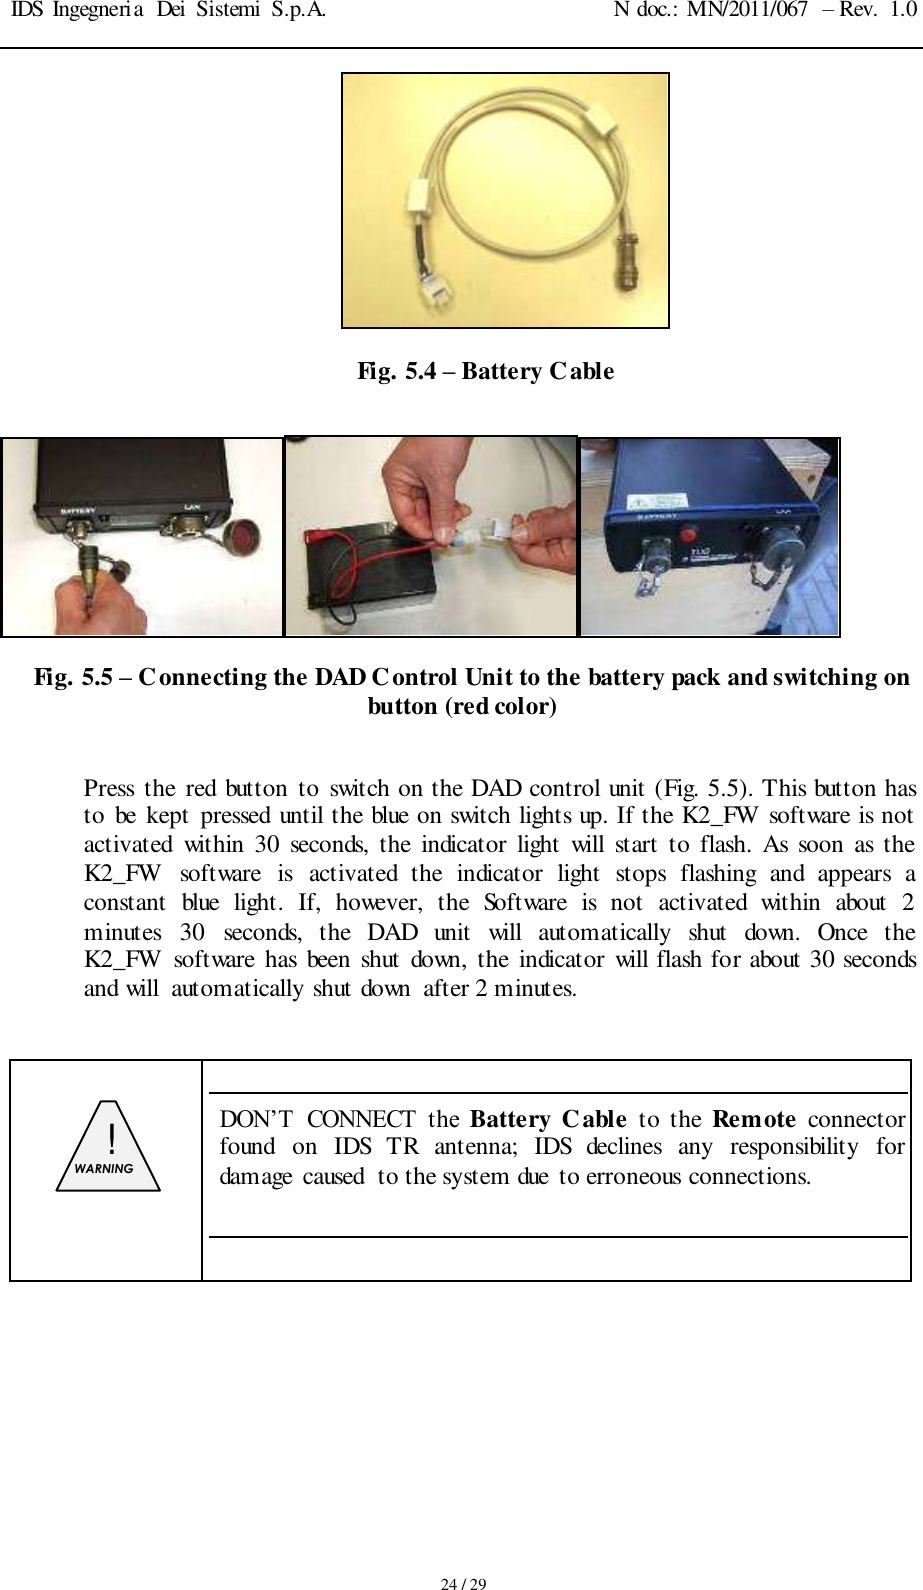 IDS Ingegneria  Dei  Sistemi  S.p.A. N doc.: MN/2011/067  – Rev.  1.0     24 / 29  Fig. 5.4 – Battery Cable   Fig. 5.5 – Connecting the DAD Control Unit to the battery pack and switching on button (red color)  Press  the red  button  to switch on the DAD control unit (Fig. 5.5). This button has to  be  kept  pressed  until the blue on switch lights up. If the K2_FW software is not activated  within 30  seconds,  the  indicator  light  will  start  to  flash.  As  soon  as  the K2_FW  software  is  activated  the  indicator  light  stops  flashing  and  appears  a constant  blue  light.  If,  however,  the  Software  is  not  activated  within  about  2 minutes  30  seconds,  the  DAD  unit  will  automatically  shut  down.  Once  the K2_FW software  has  been  shut  down,  the  indicator  will flash for about 30 seconds and will  automatically shut down  after 2 minutes.    !  WARNING   DON’T  CONNECT  the  Battery Cable  to the  Remote  connector found  on  IDS  TR  antenna;  IDS  declines  any  responsibility  for damage  caused  to the system due to erroneous connections.        